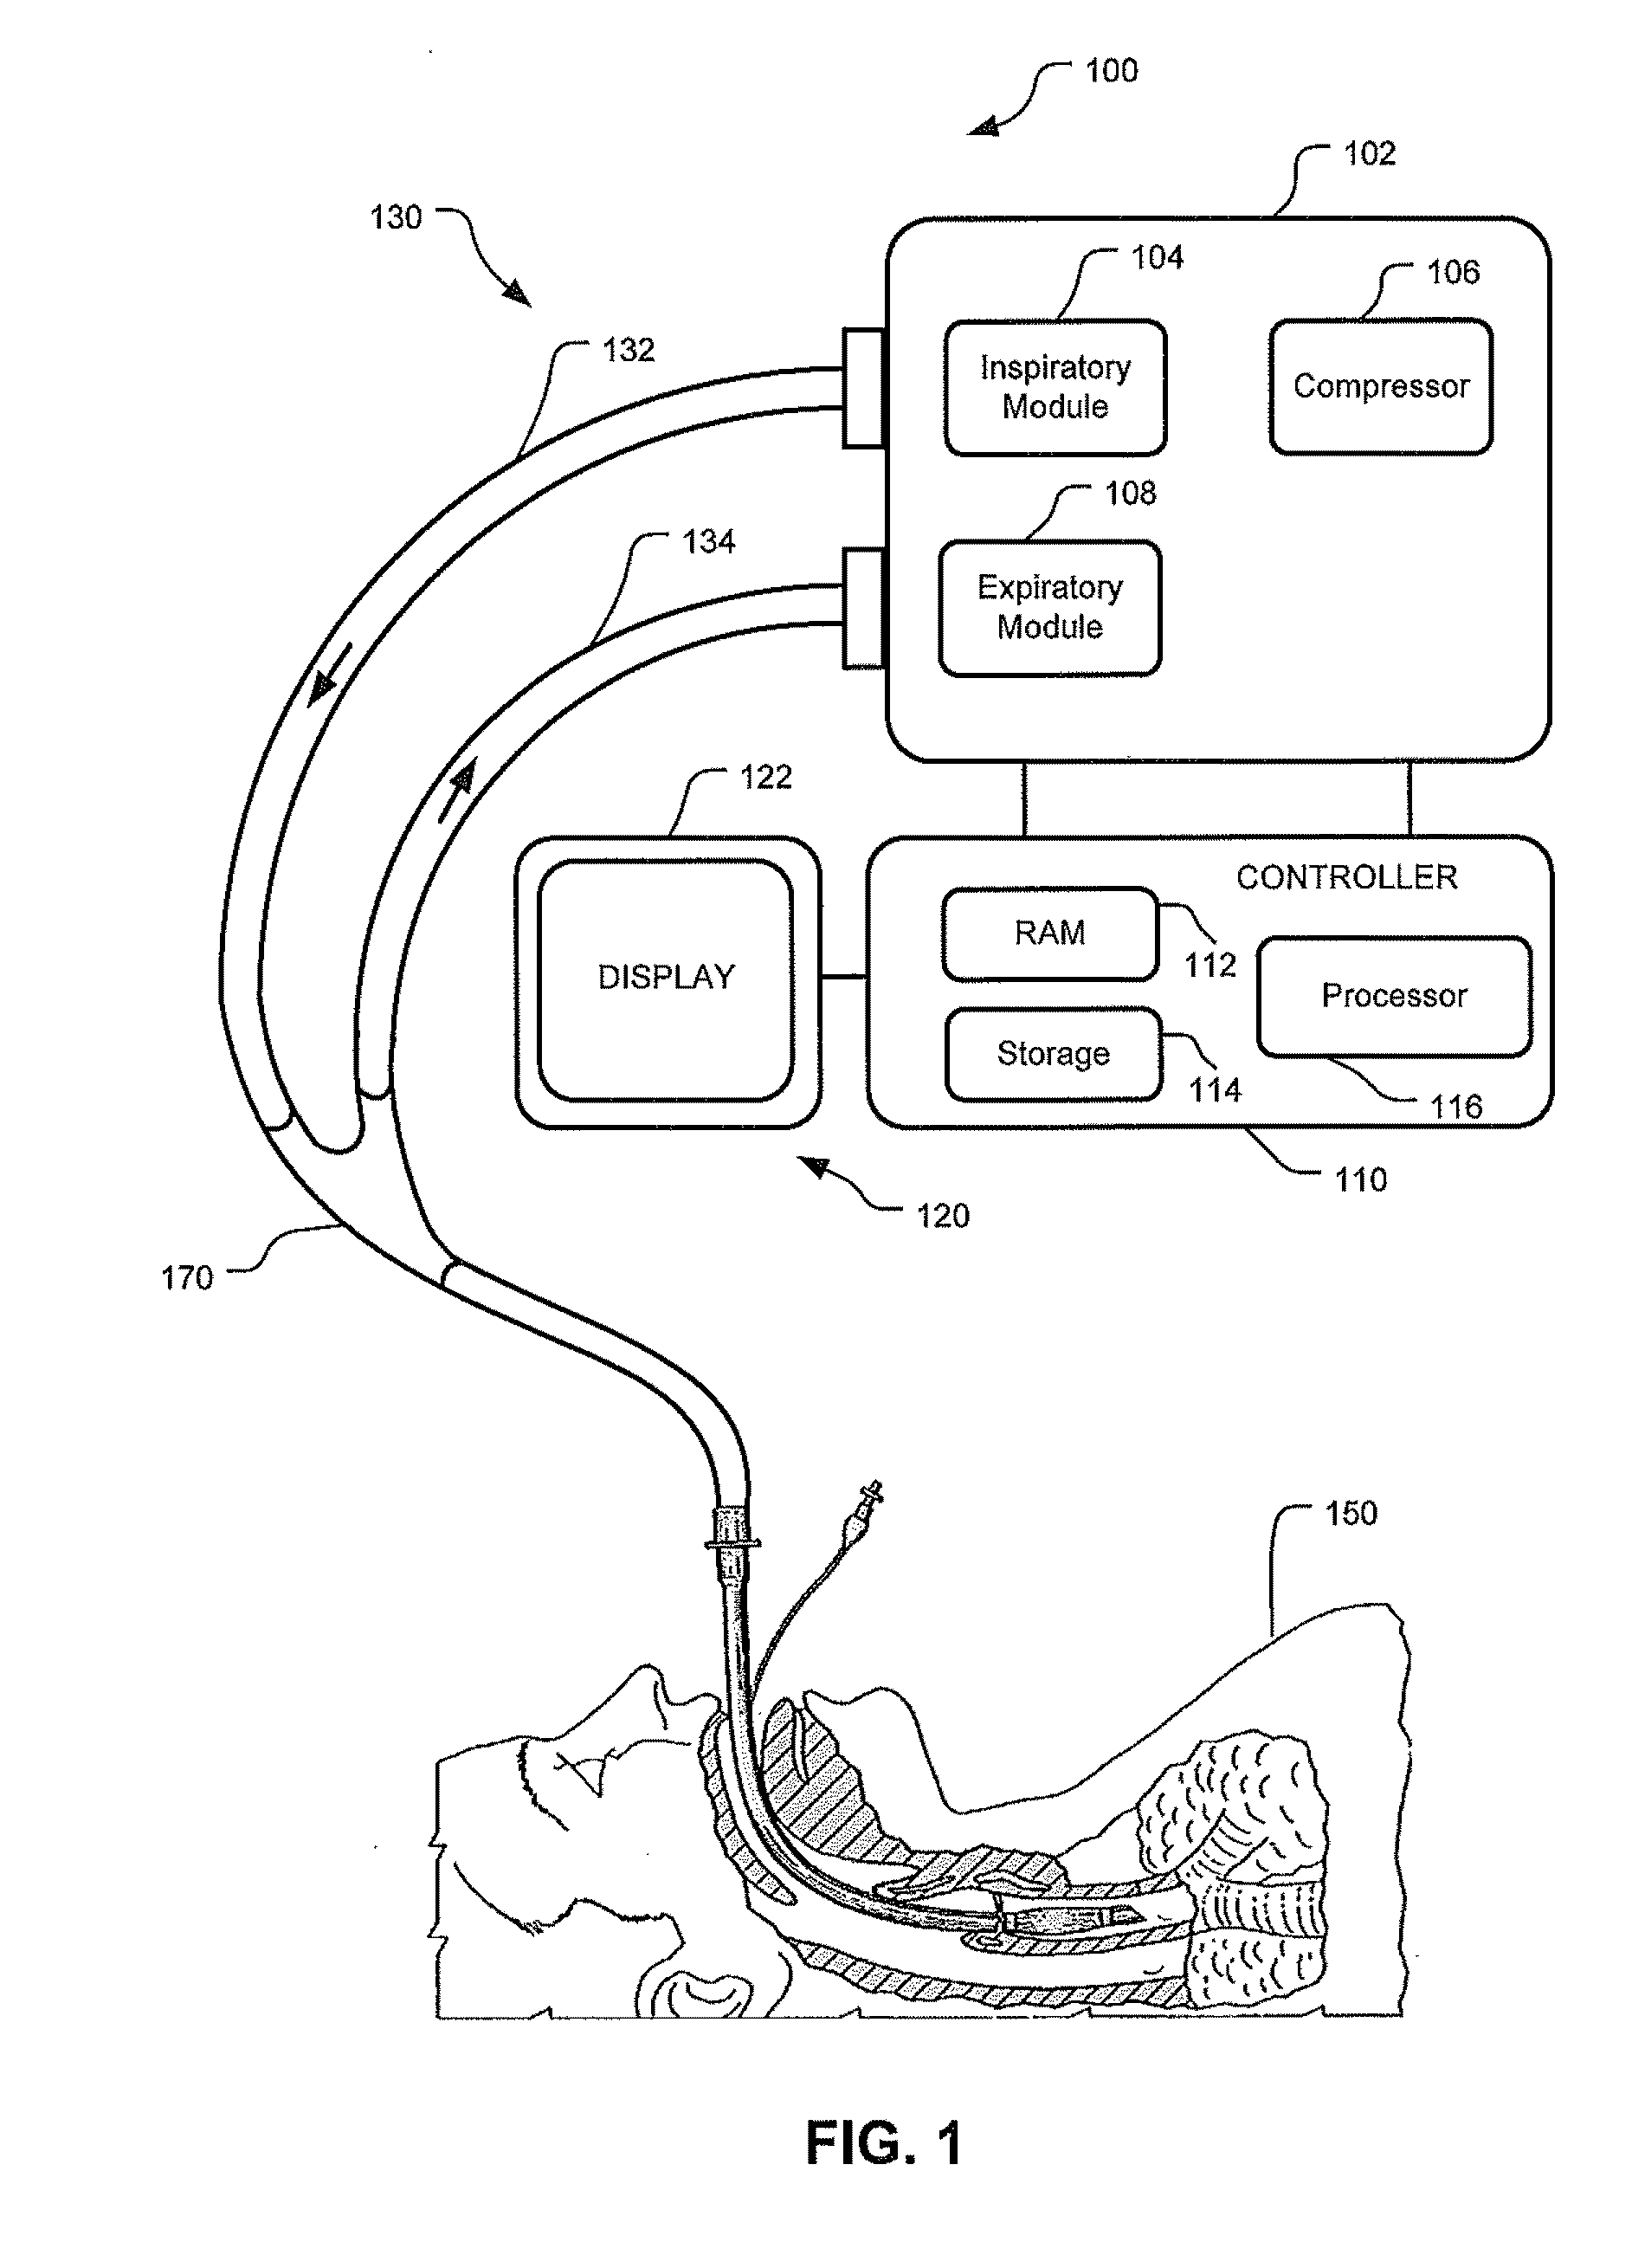 Nuisance Alarm Reduction Method For Therapeutic Parameters